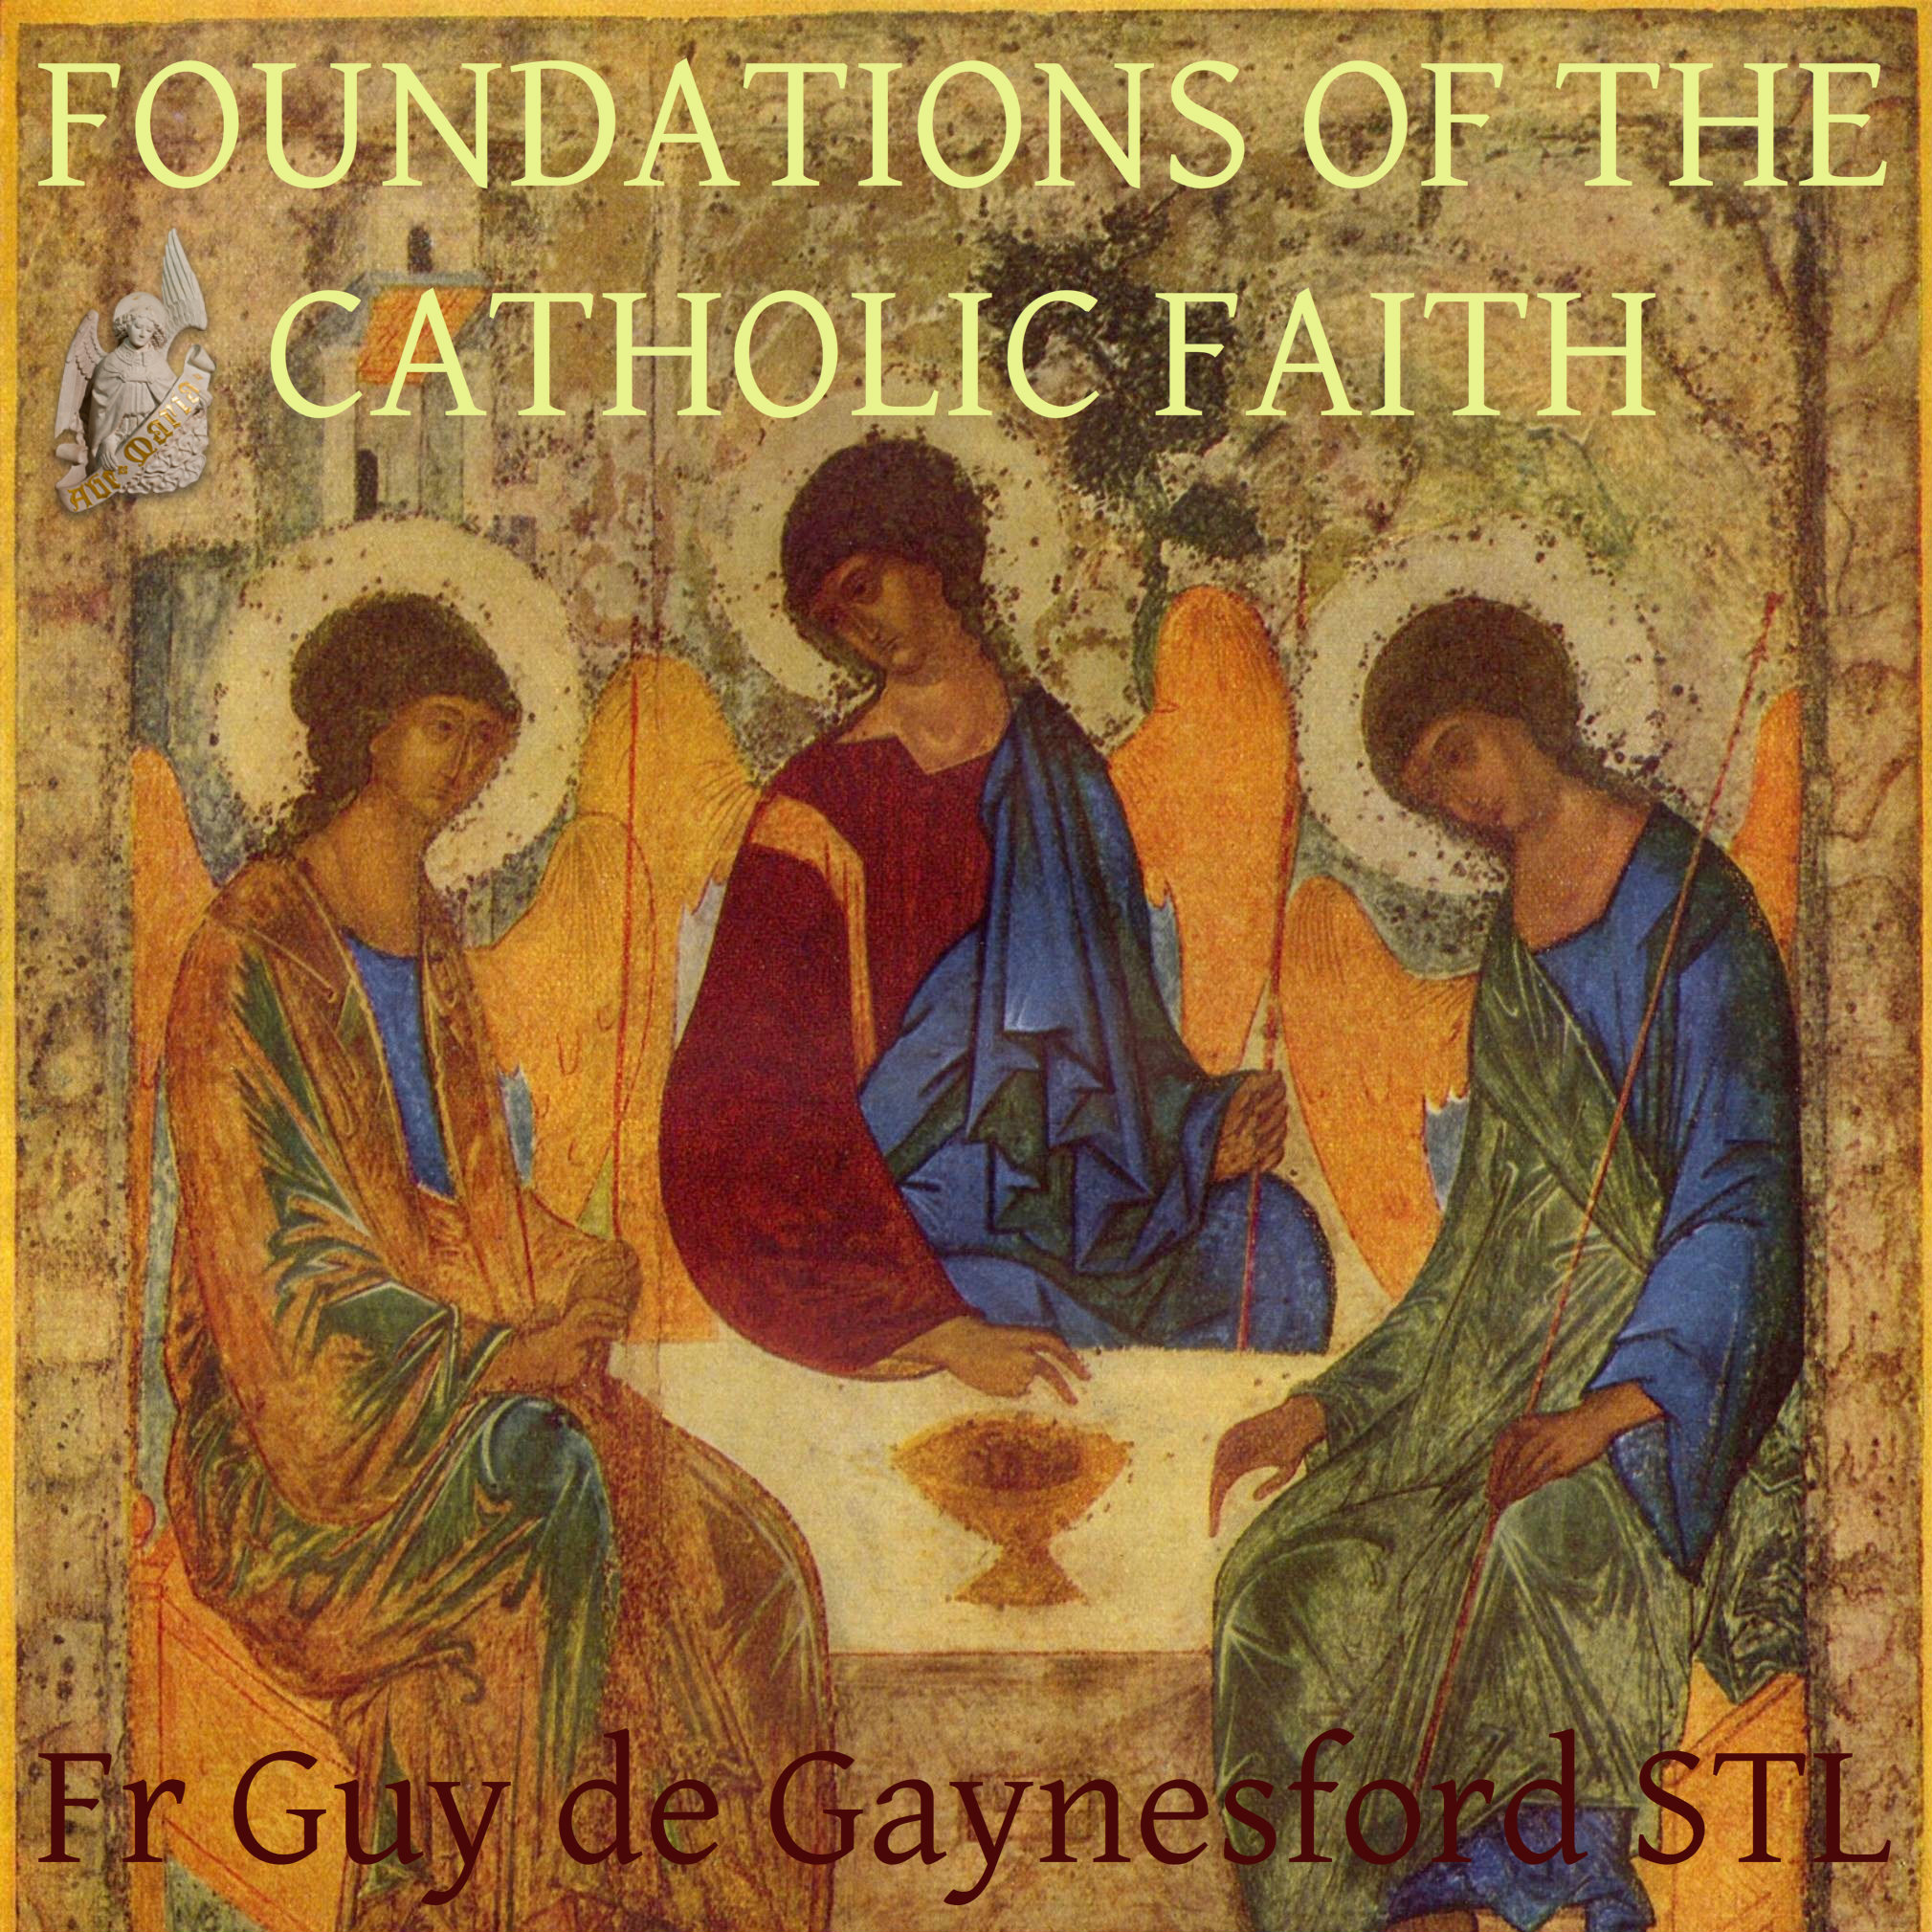 The Foundations of the Catholic Faith – ST PAUL REPOSITORY